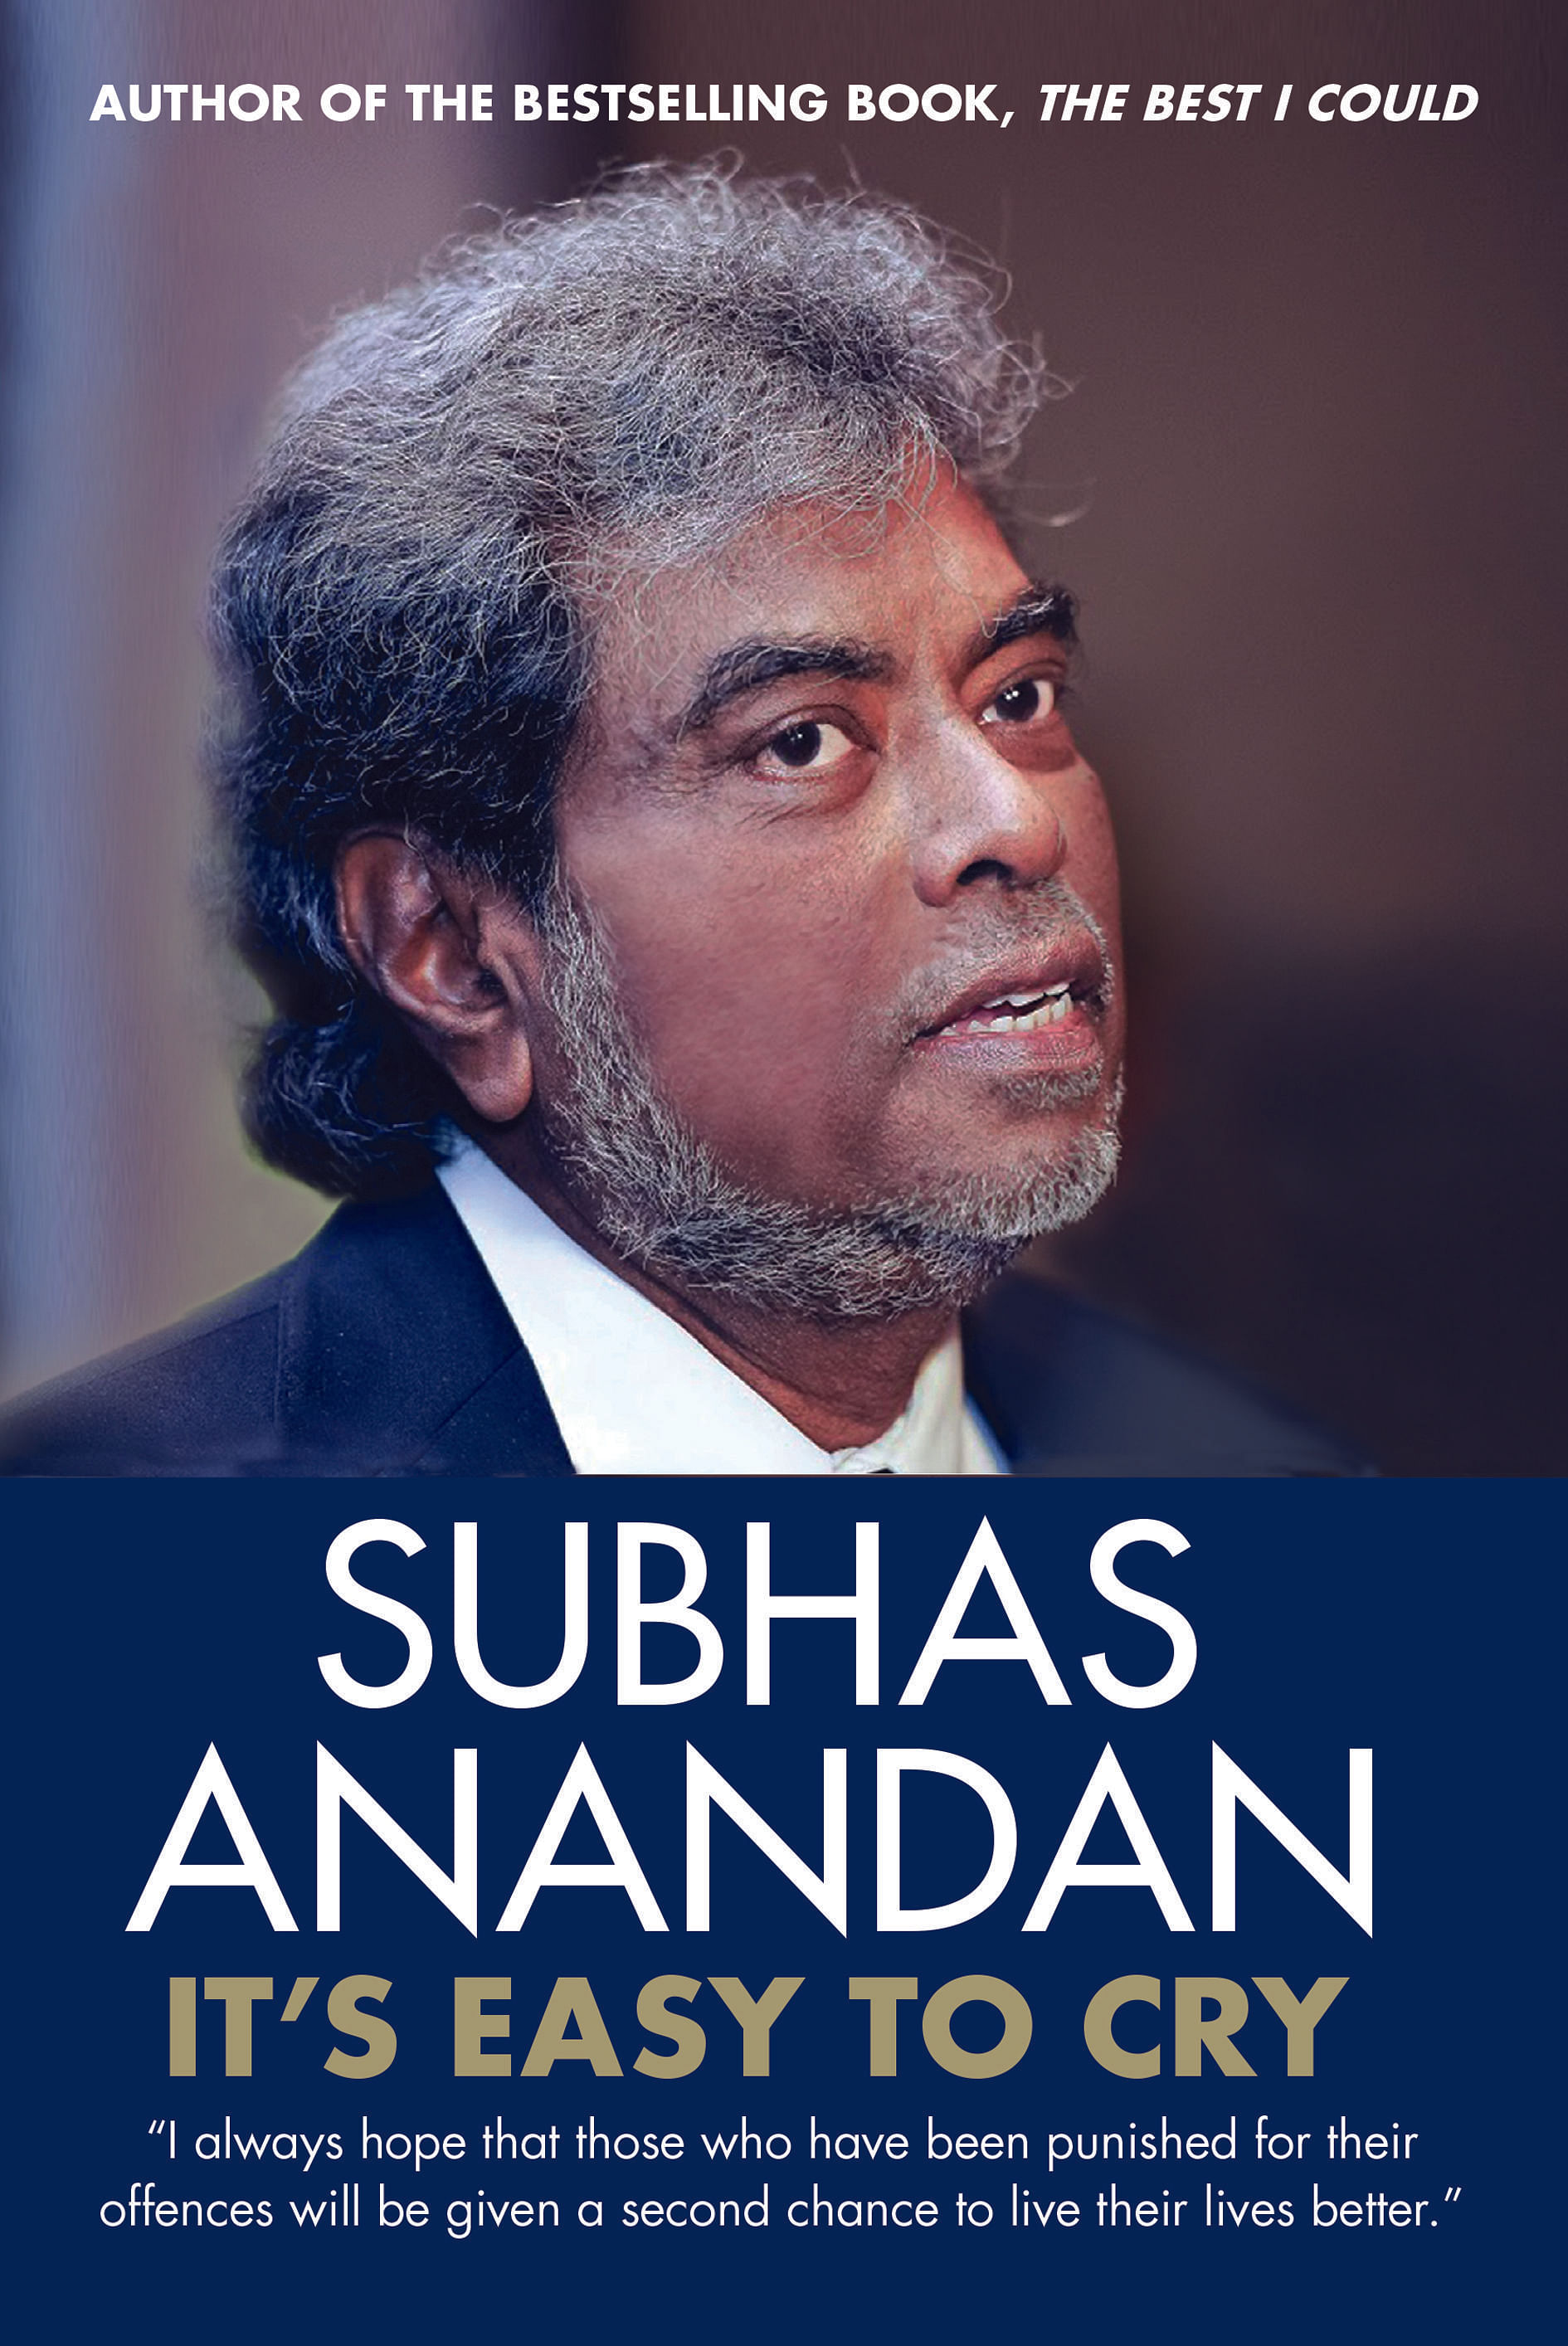 The late Subhas Anandan's second book will hit bookstores next month.